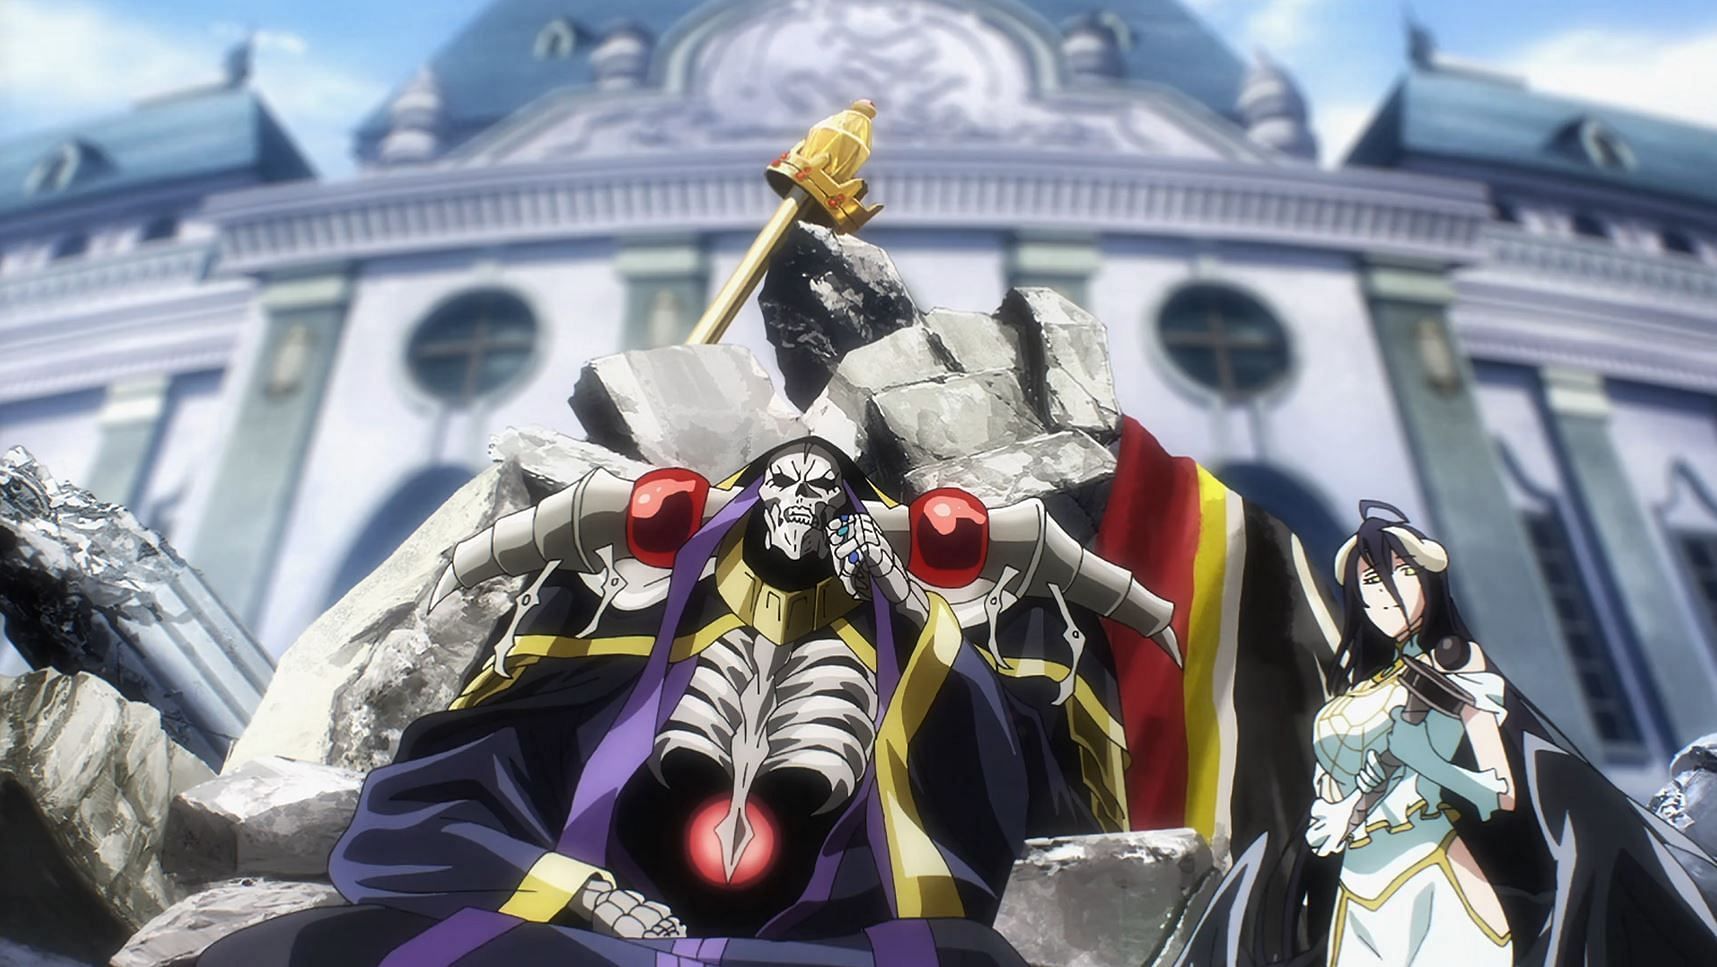 This is what happend to Enri in Season 4 of Overlord #shorts 